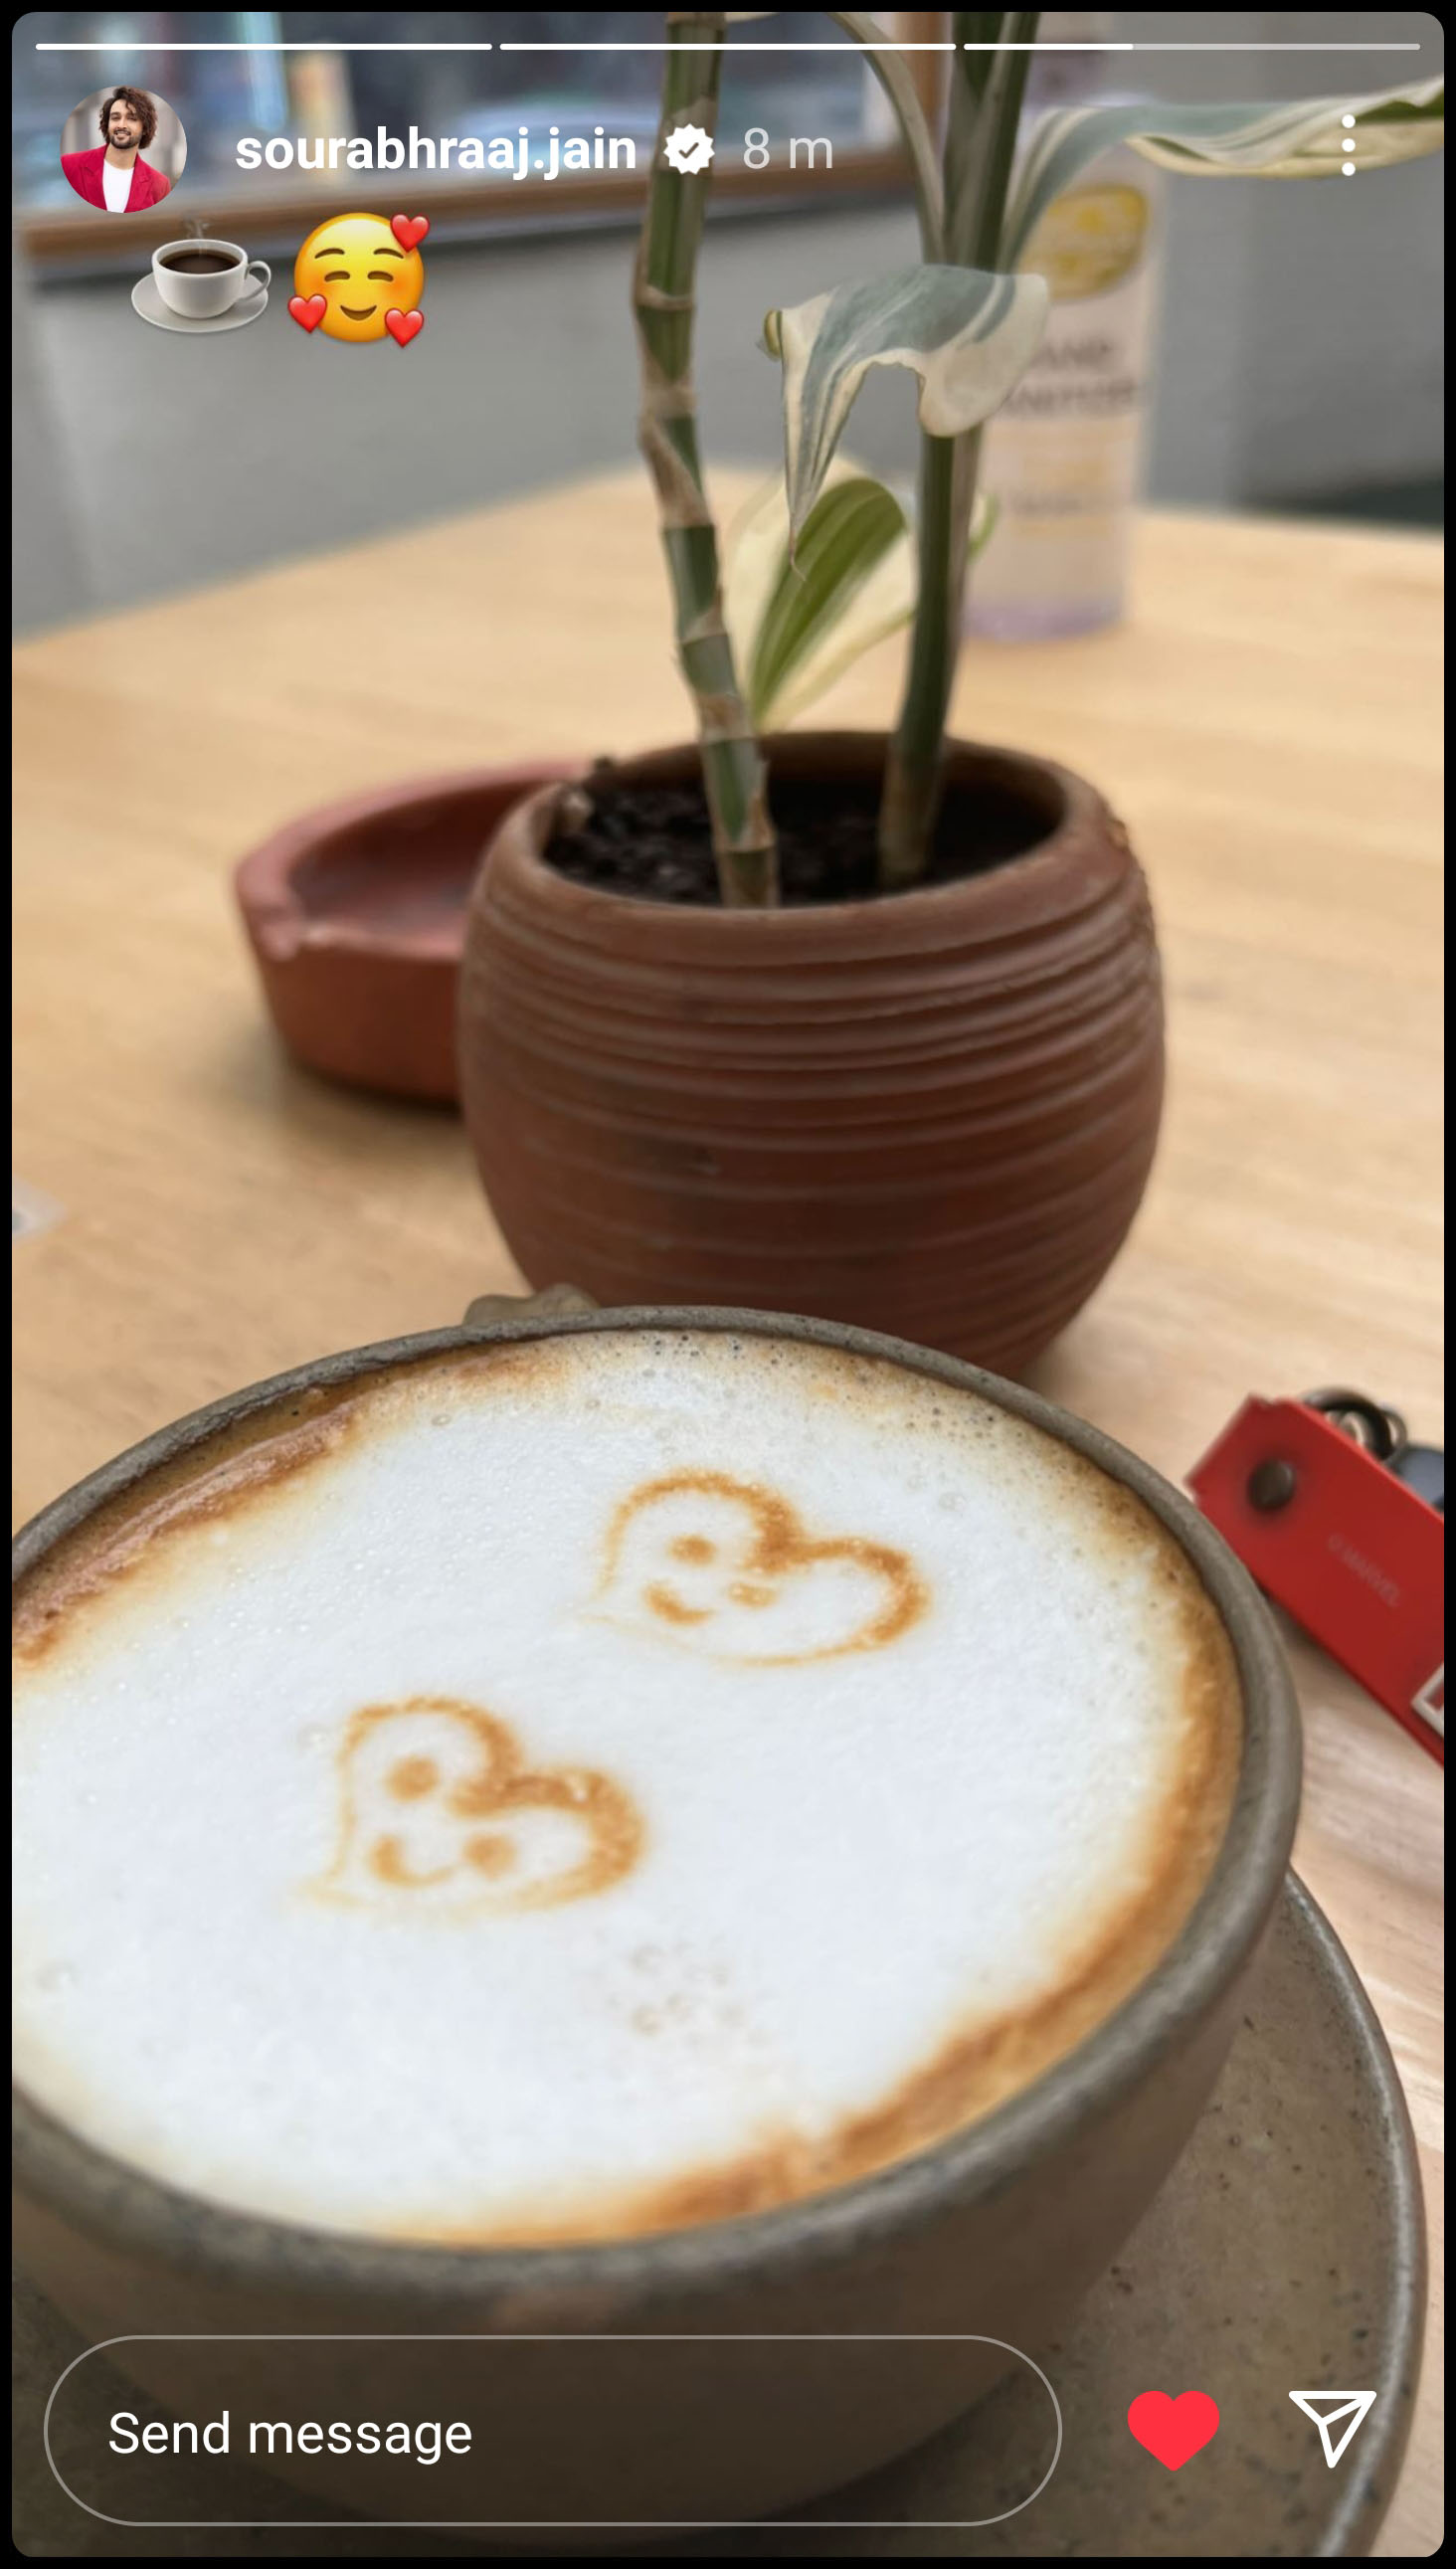 A photograph of a cup of coffee with two hearts, each with smiling faces, drawn in the foamed milk, posted as an Instagram story by Sourabh Raaj Jain. 